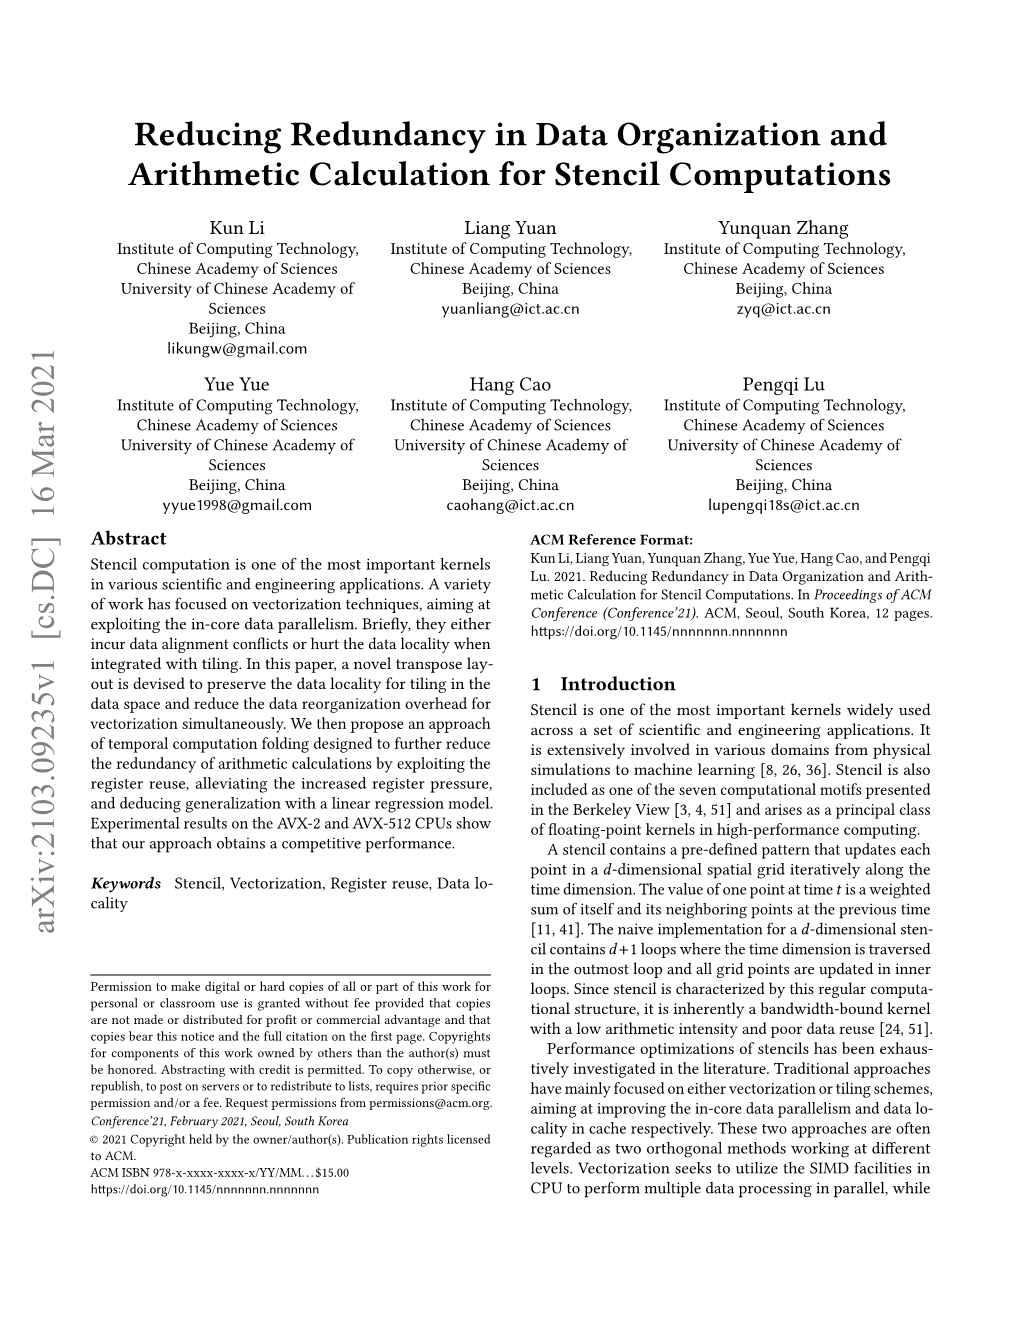 Reducing Redundancy in Data Organization and Arithmetic Calculation for Stencil Computations